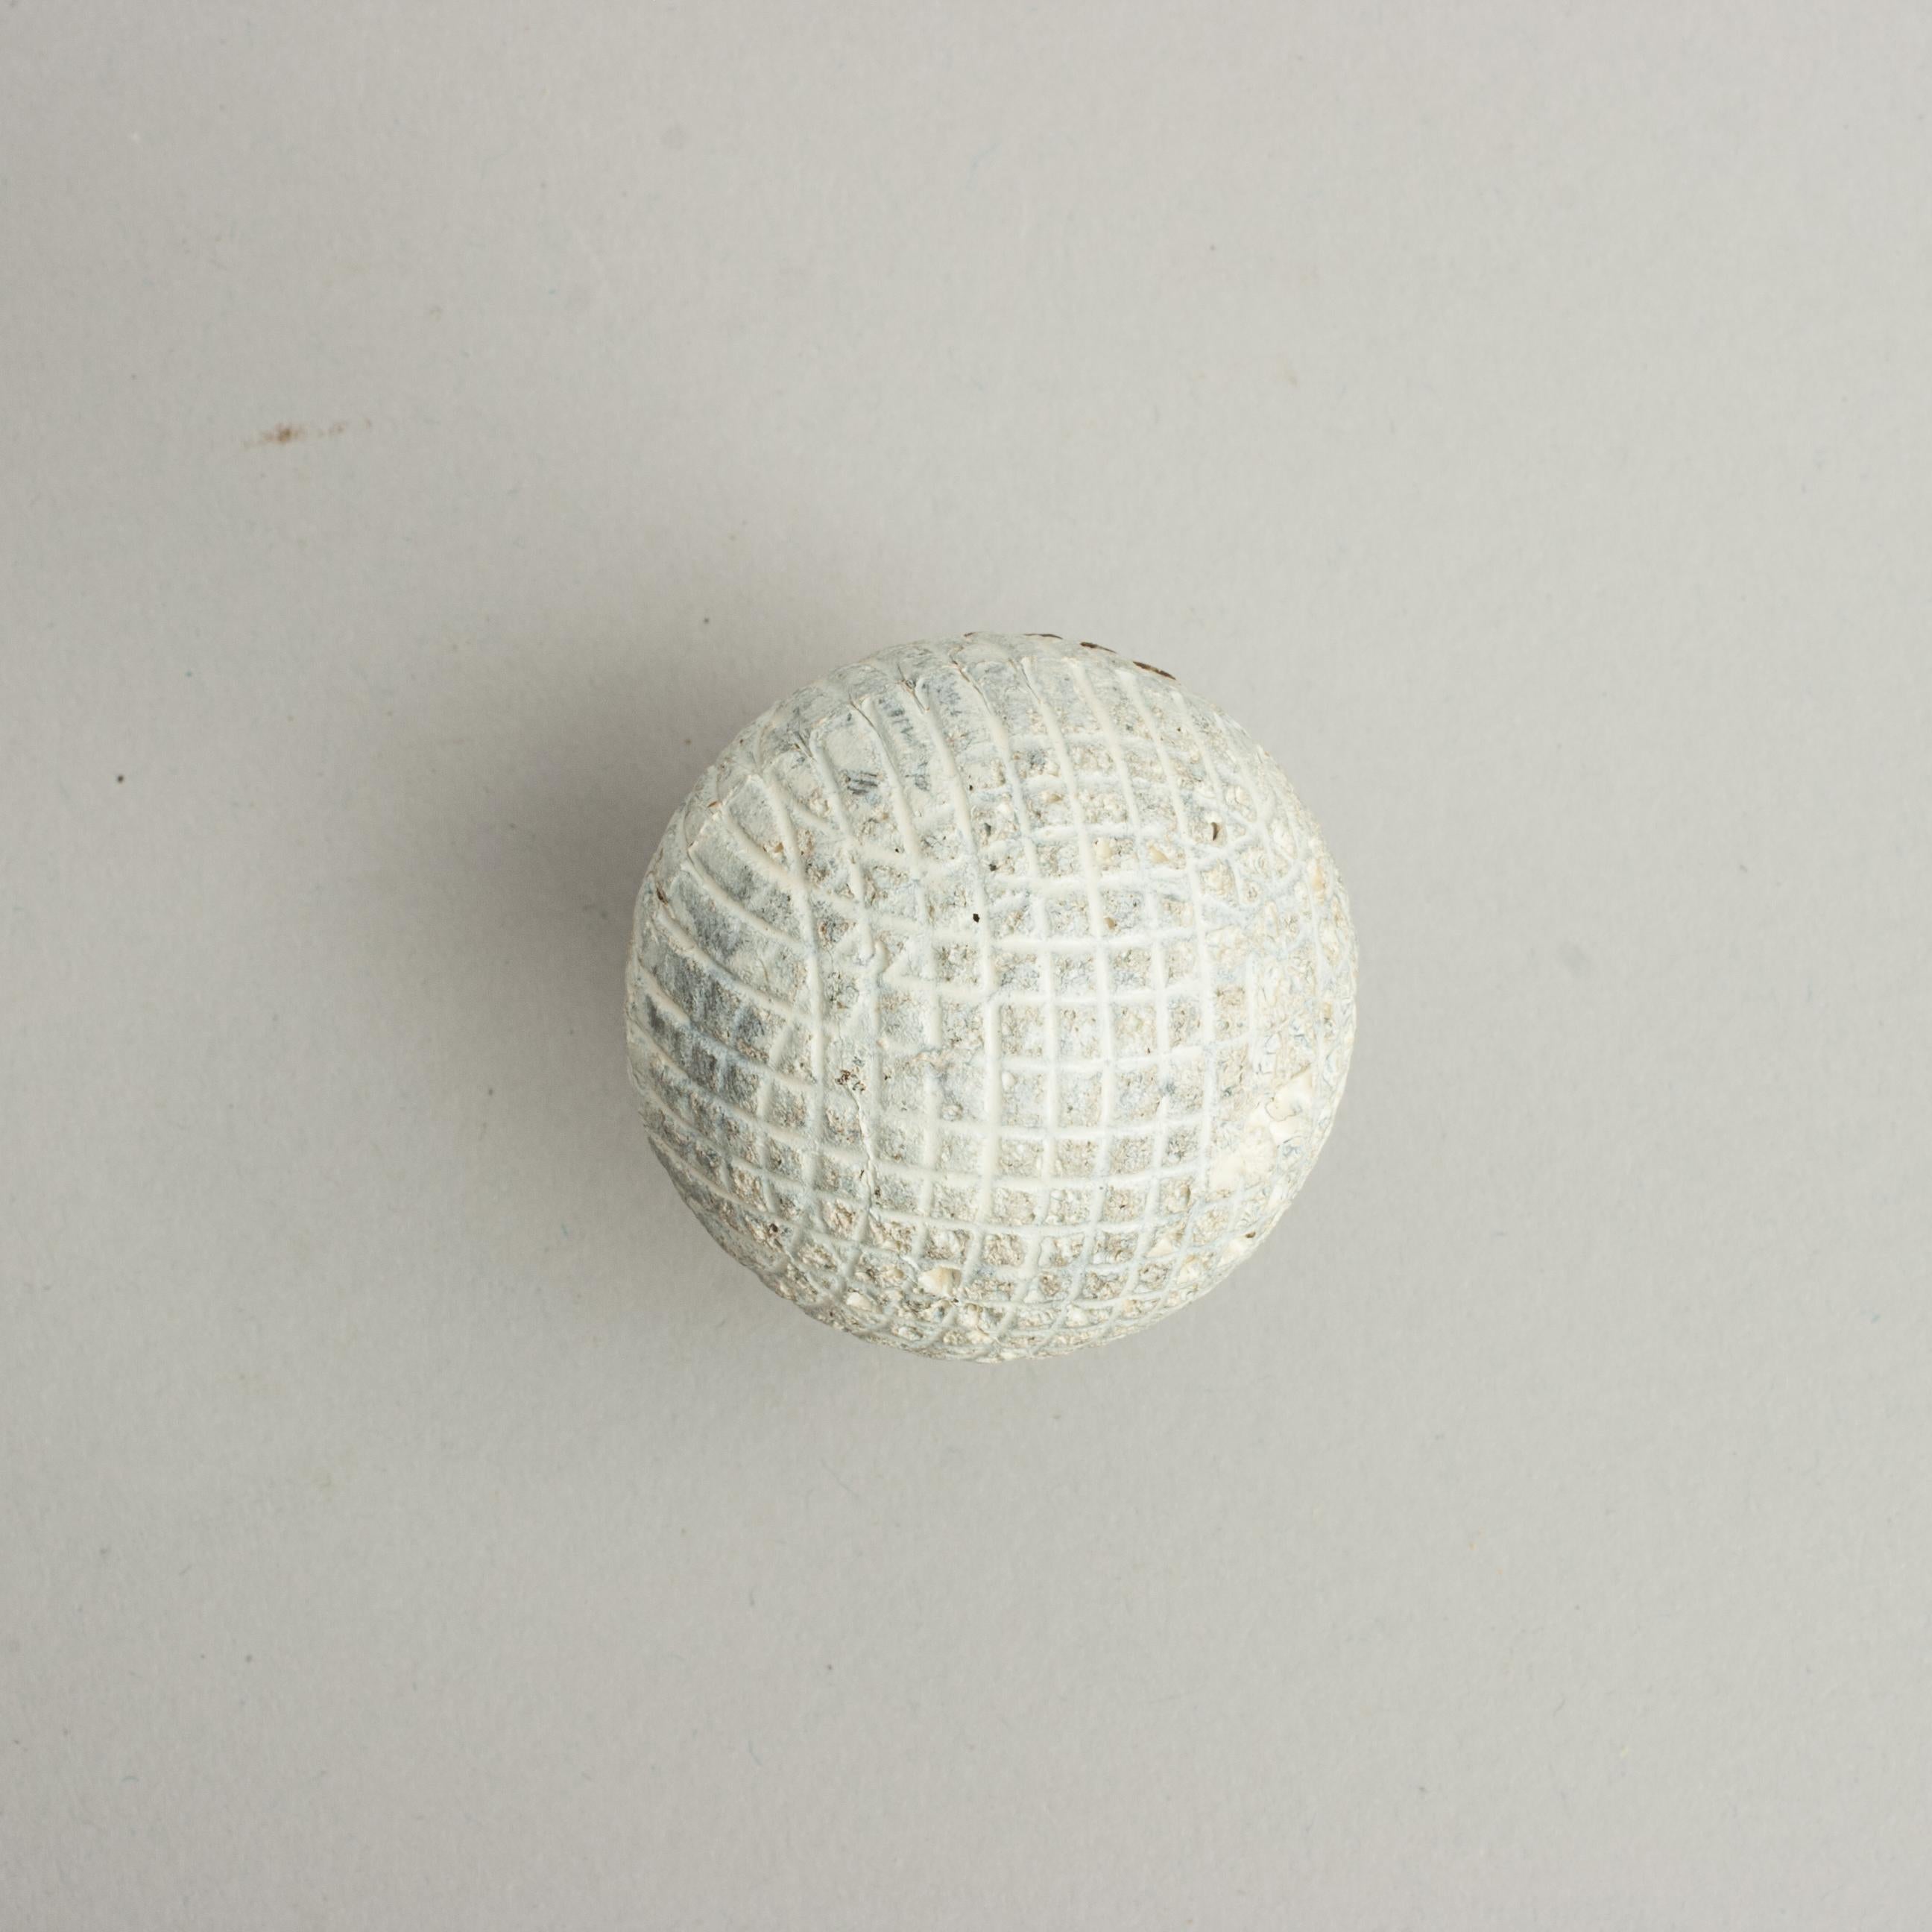 Antique Gutty Golf Ball.
A Victorian moulded mesh patterned gutta percha golf ball. The ball is in a repainted condition and is with the classic mesh pattern.

The ball is approximately 1 5/8 inch in diameter (4.2 cm).

The solid gutty golf